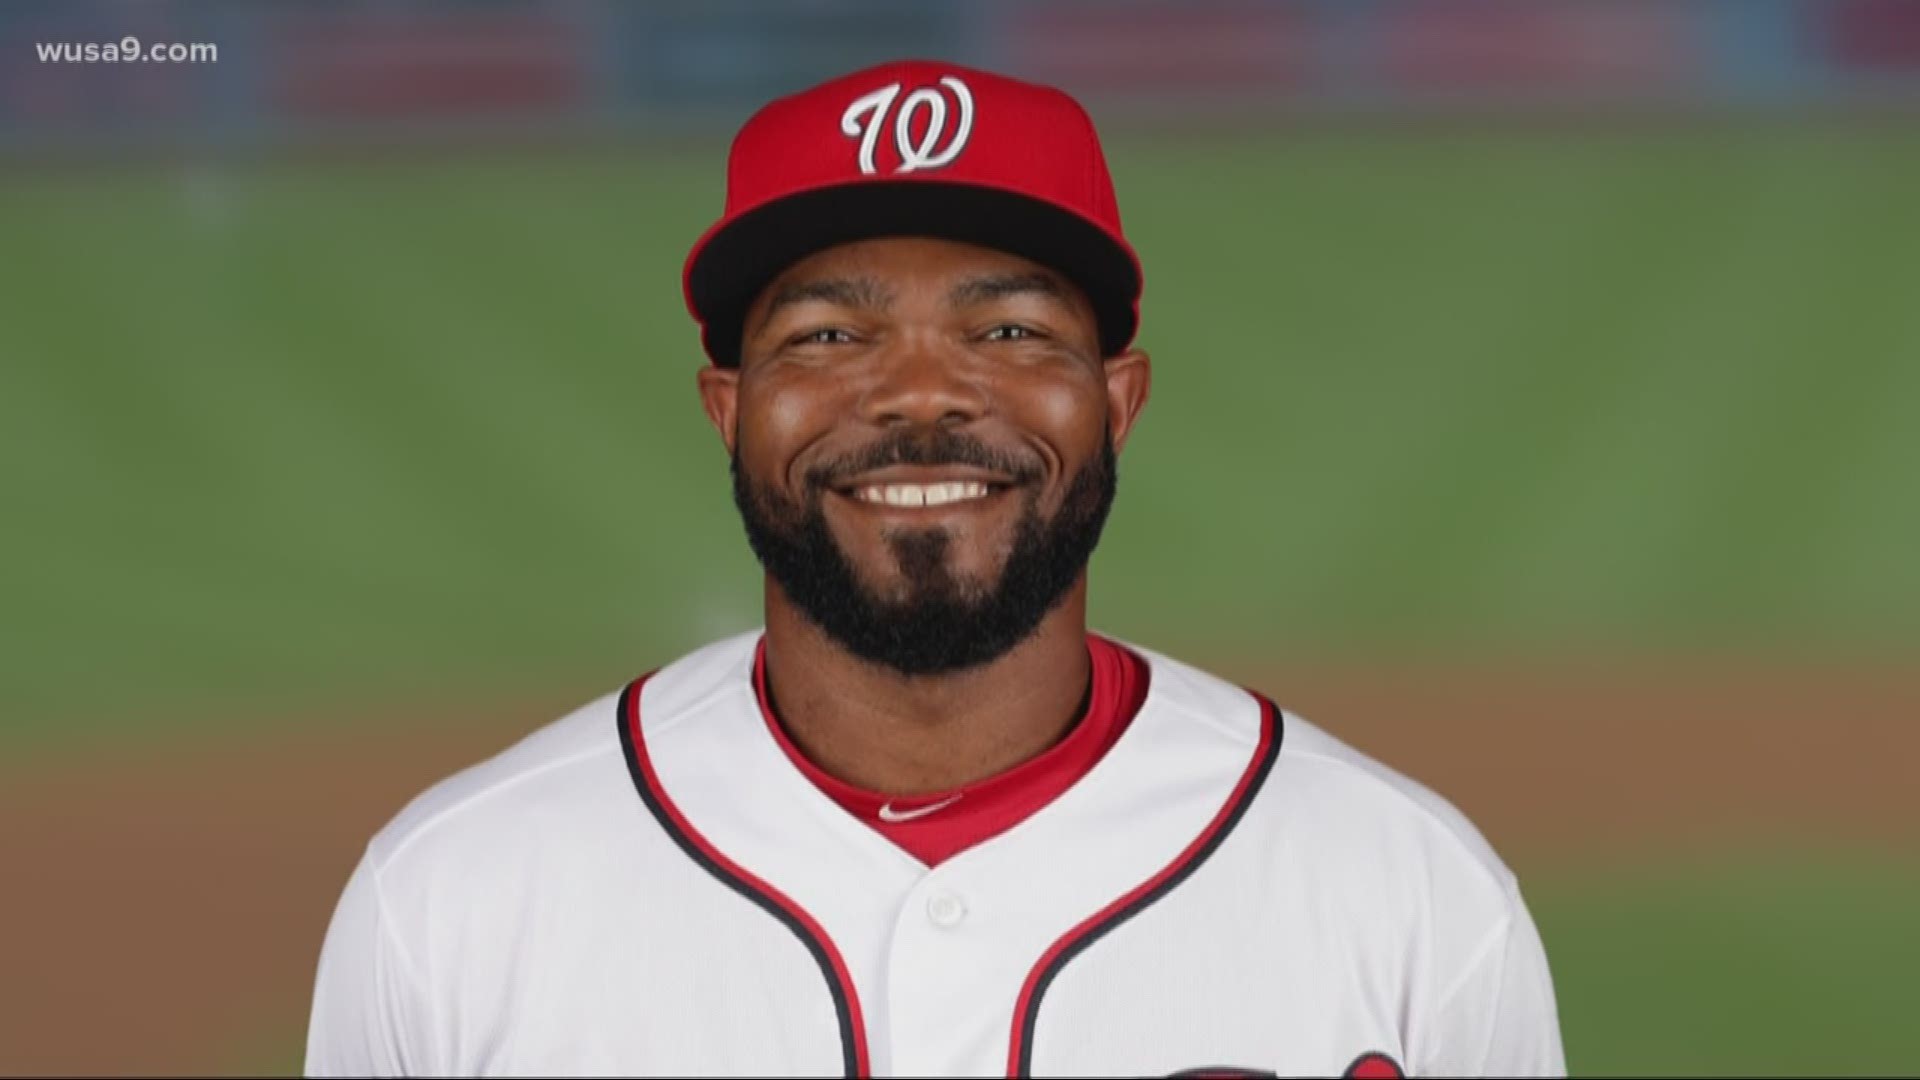 Howie Kendrick back with Nats, signs one-year deal for 2020